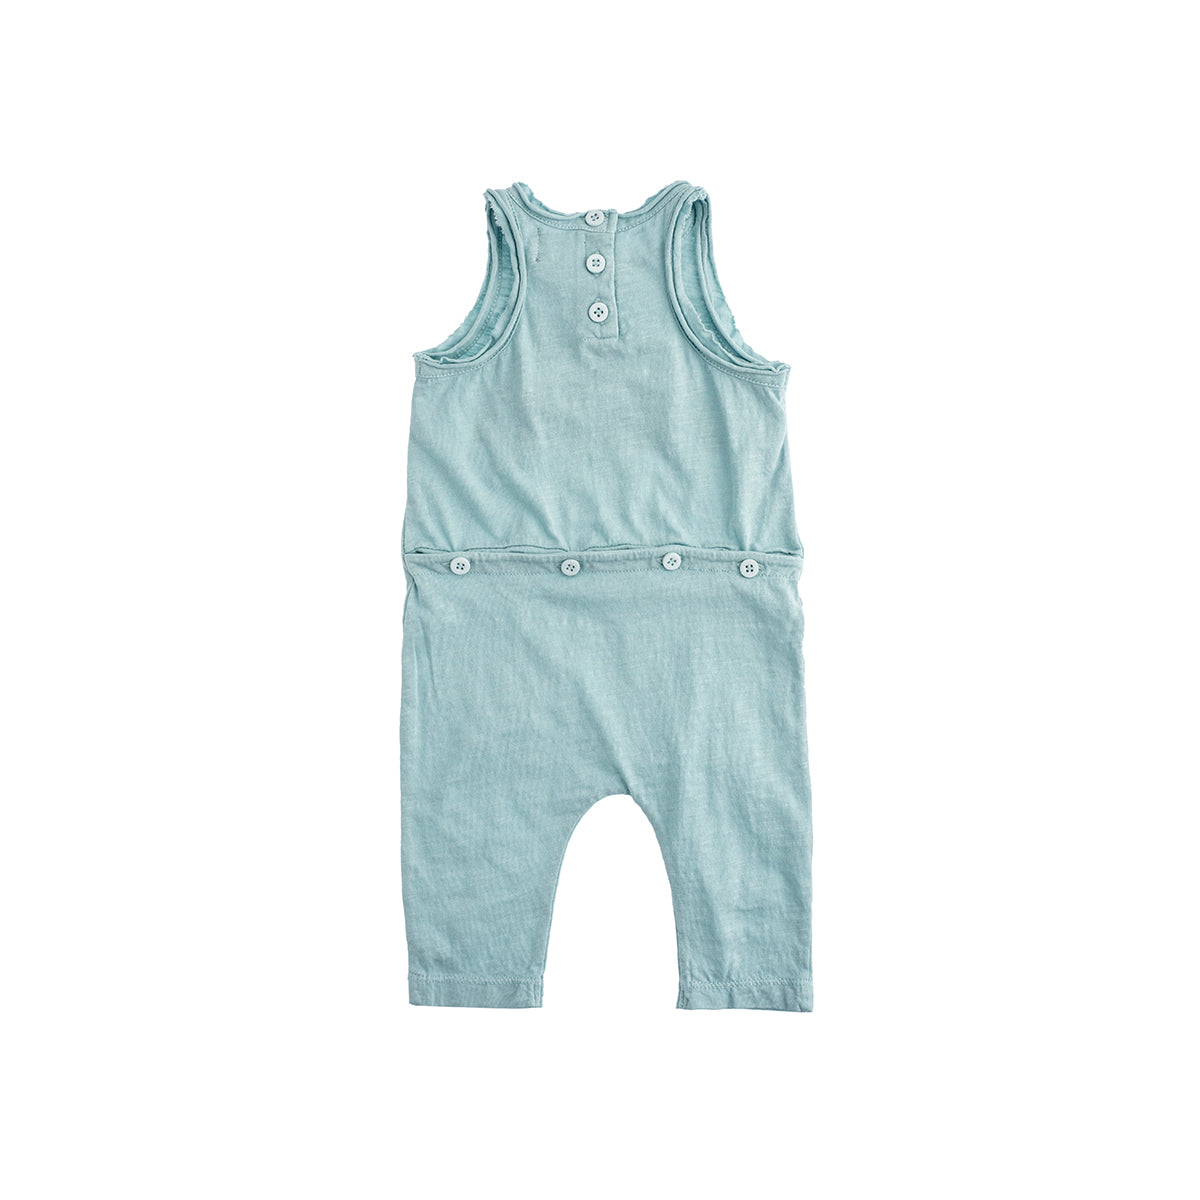 Grow with the sun Jumpsuit